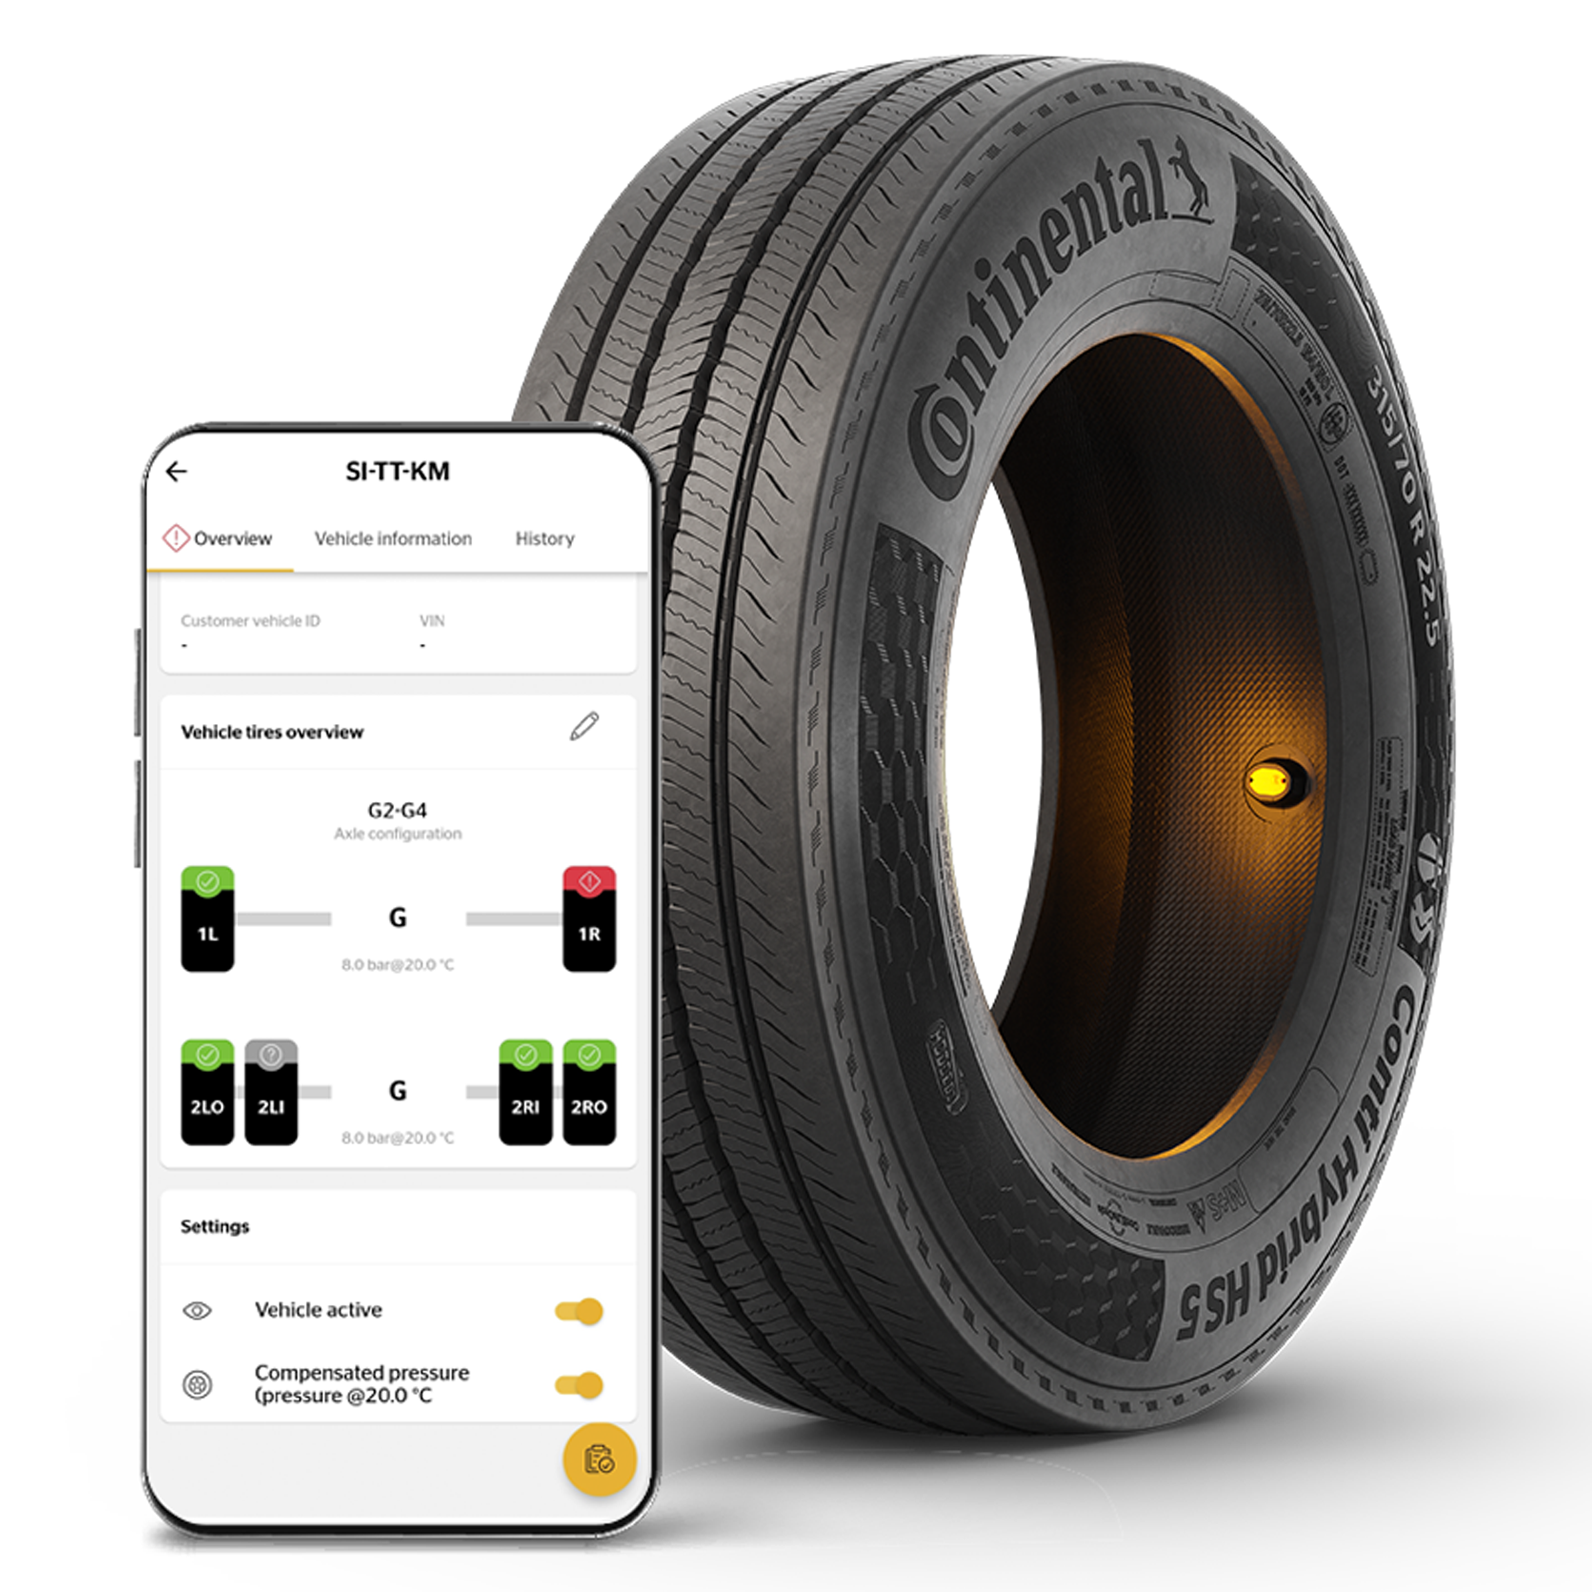 Intelligent Tire with ContiConnect Mobile App